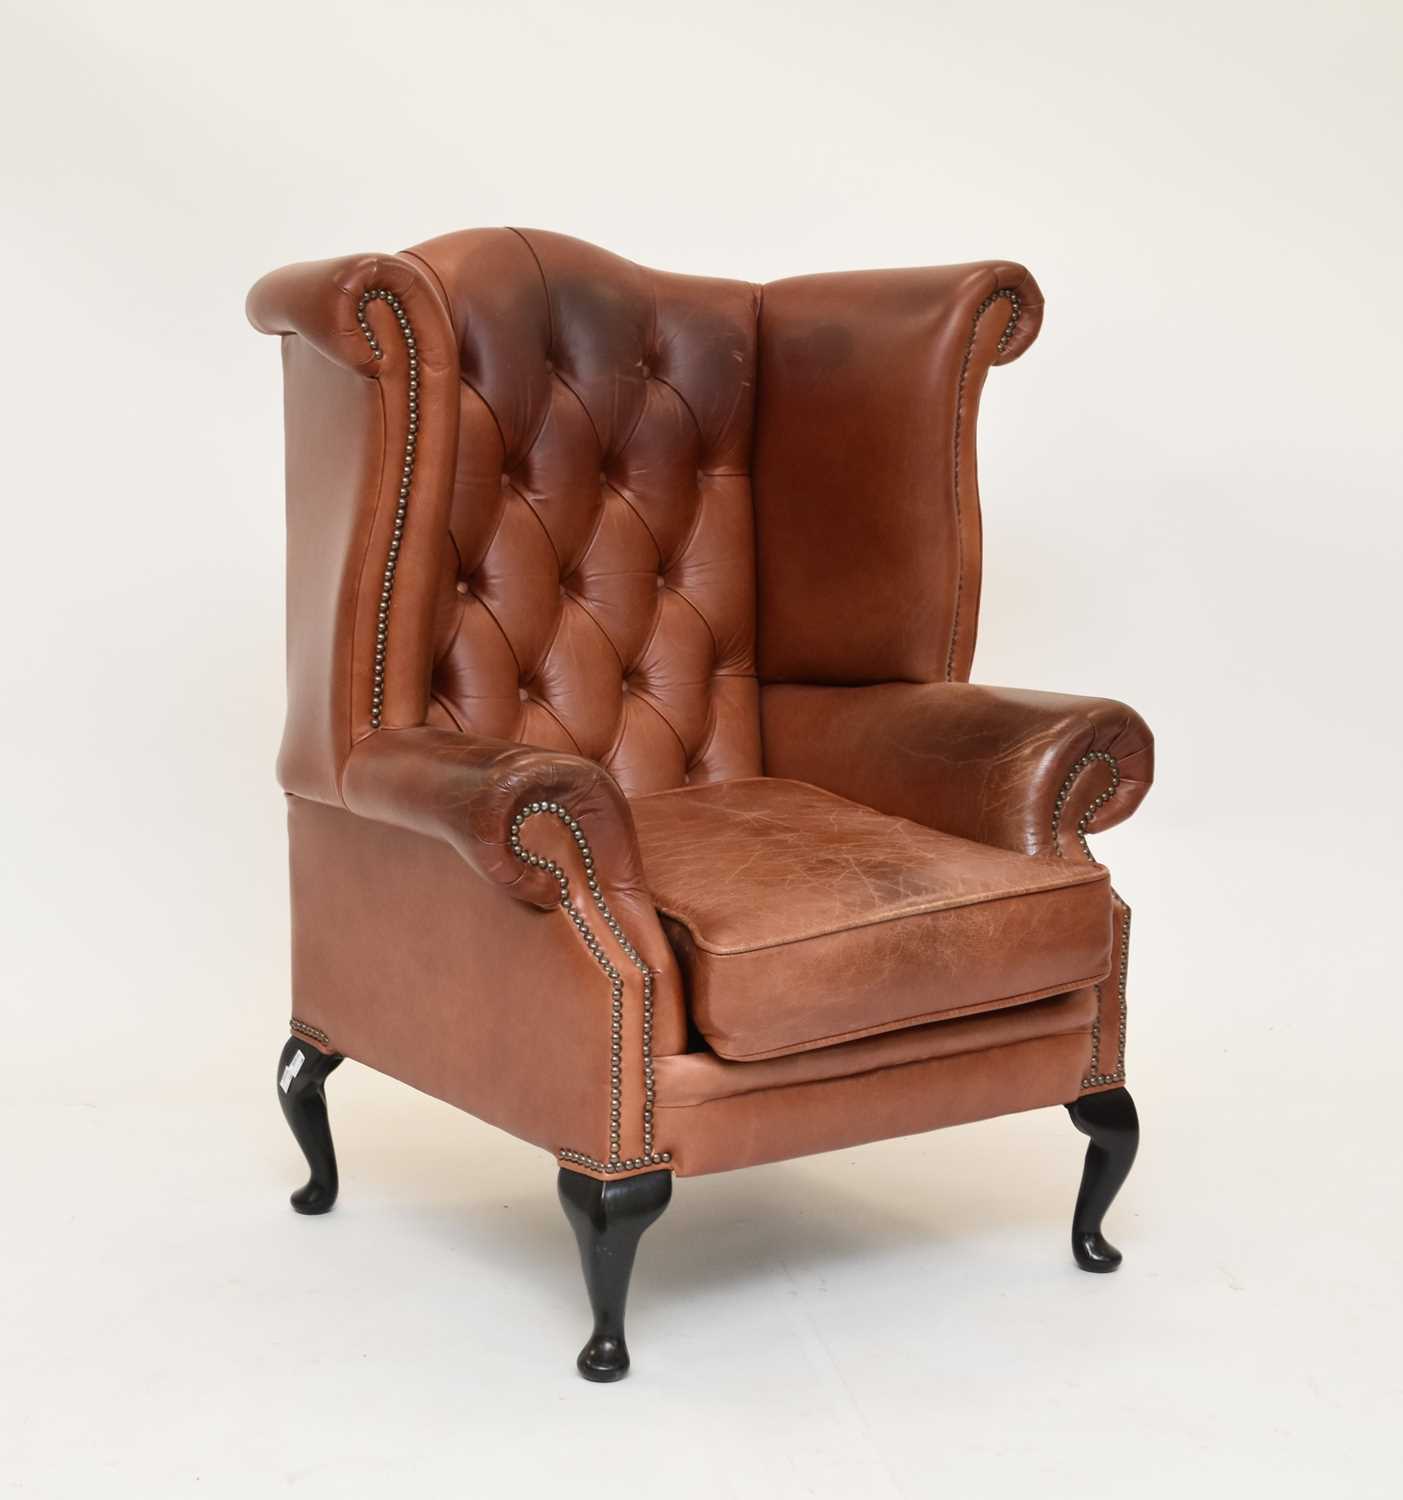 A reproduction tan leather wing armchair